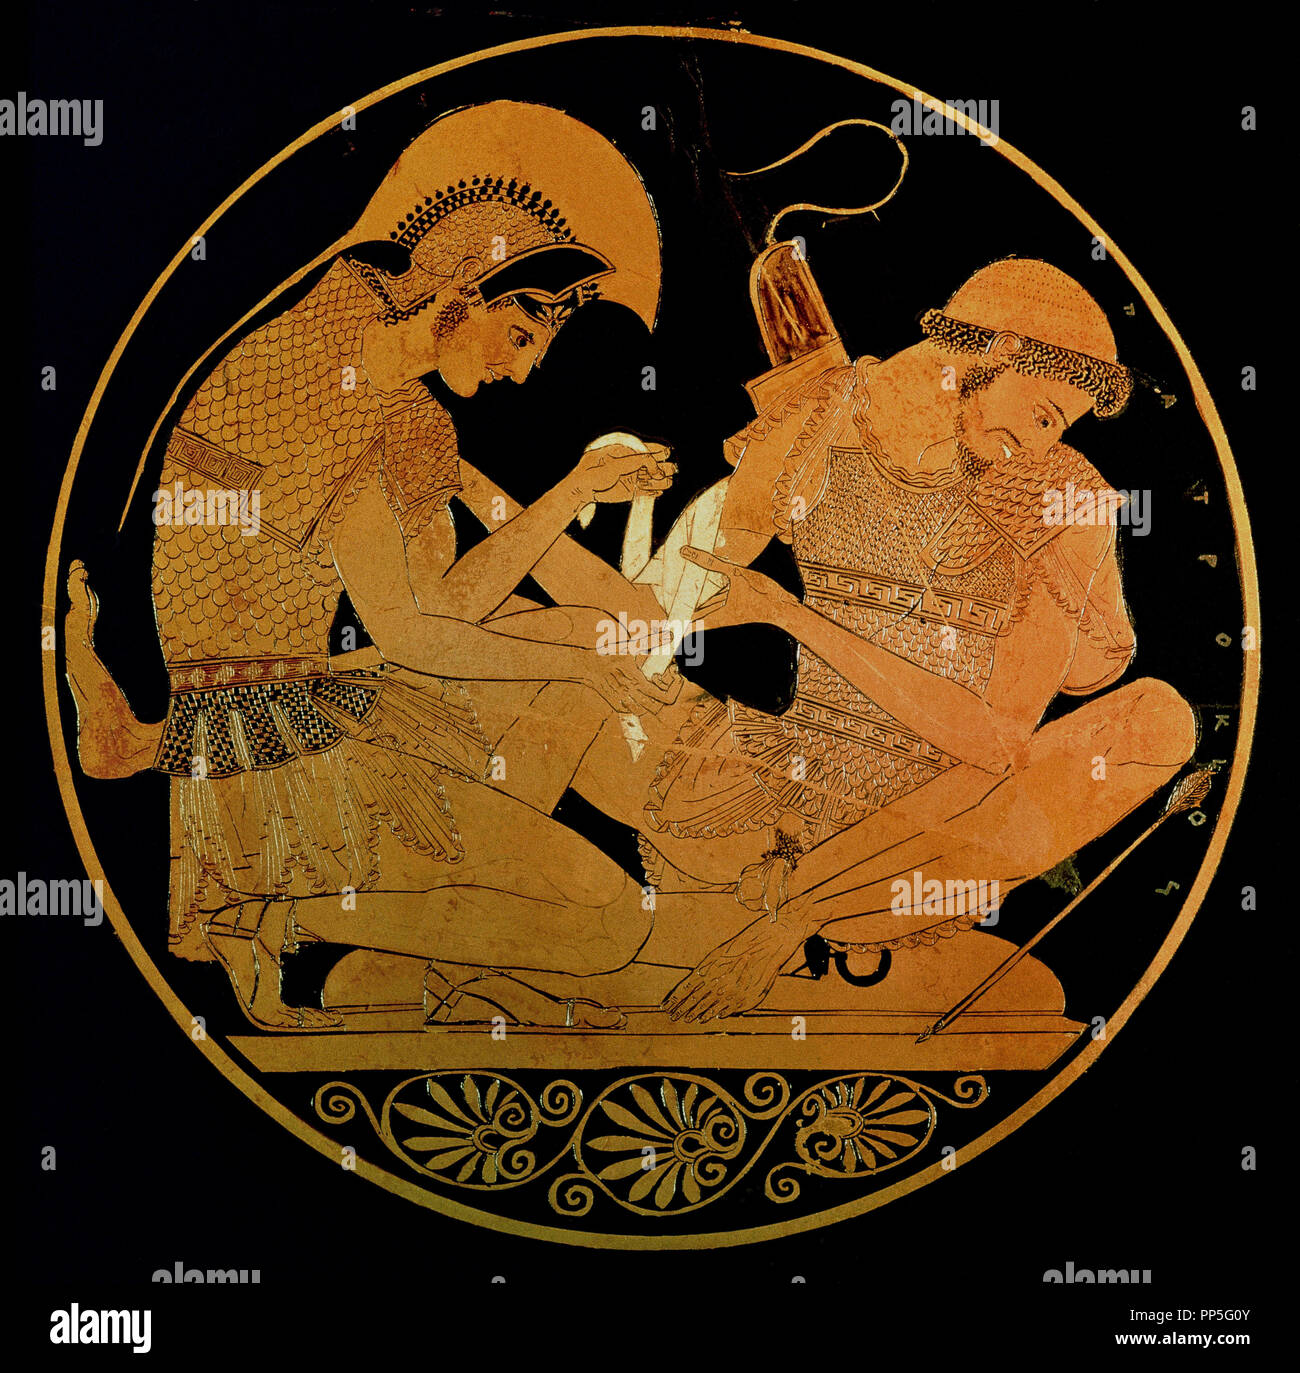 CUP OF SOSIAS - 'AQUILES BANDAGES THE WOUND OF PATROCLUS' - CERAMIC GREEK - 5th CENTURY BCE - REDRAWED BY C. FERNANDEZ. Author: SOSIAS (VASE PAINTER). Location: CHARLOTTENBURG. BERLIN. GERMANY. Stock Photo